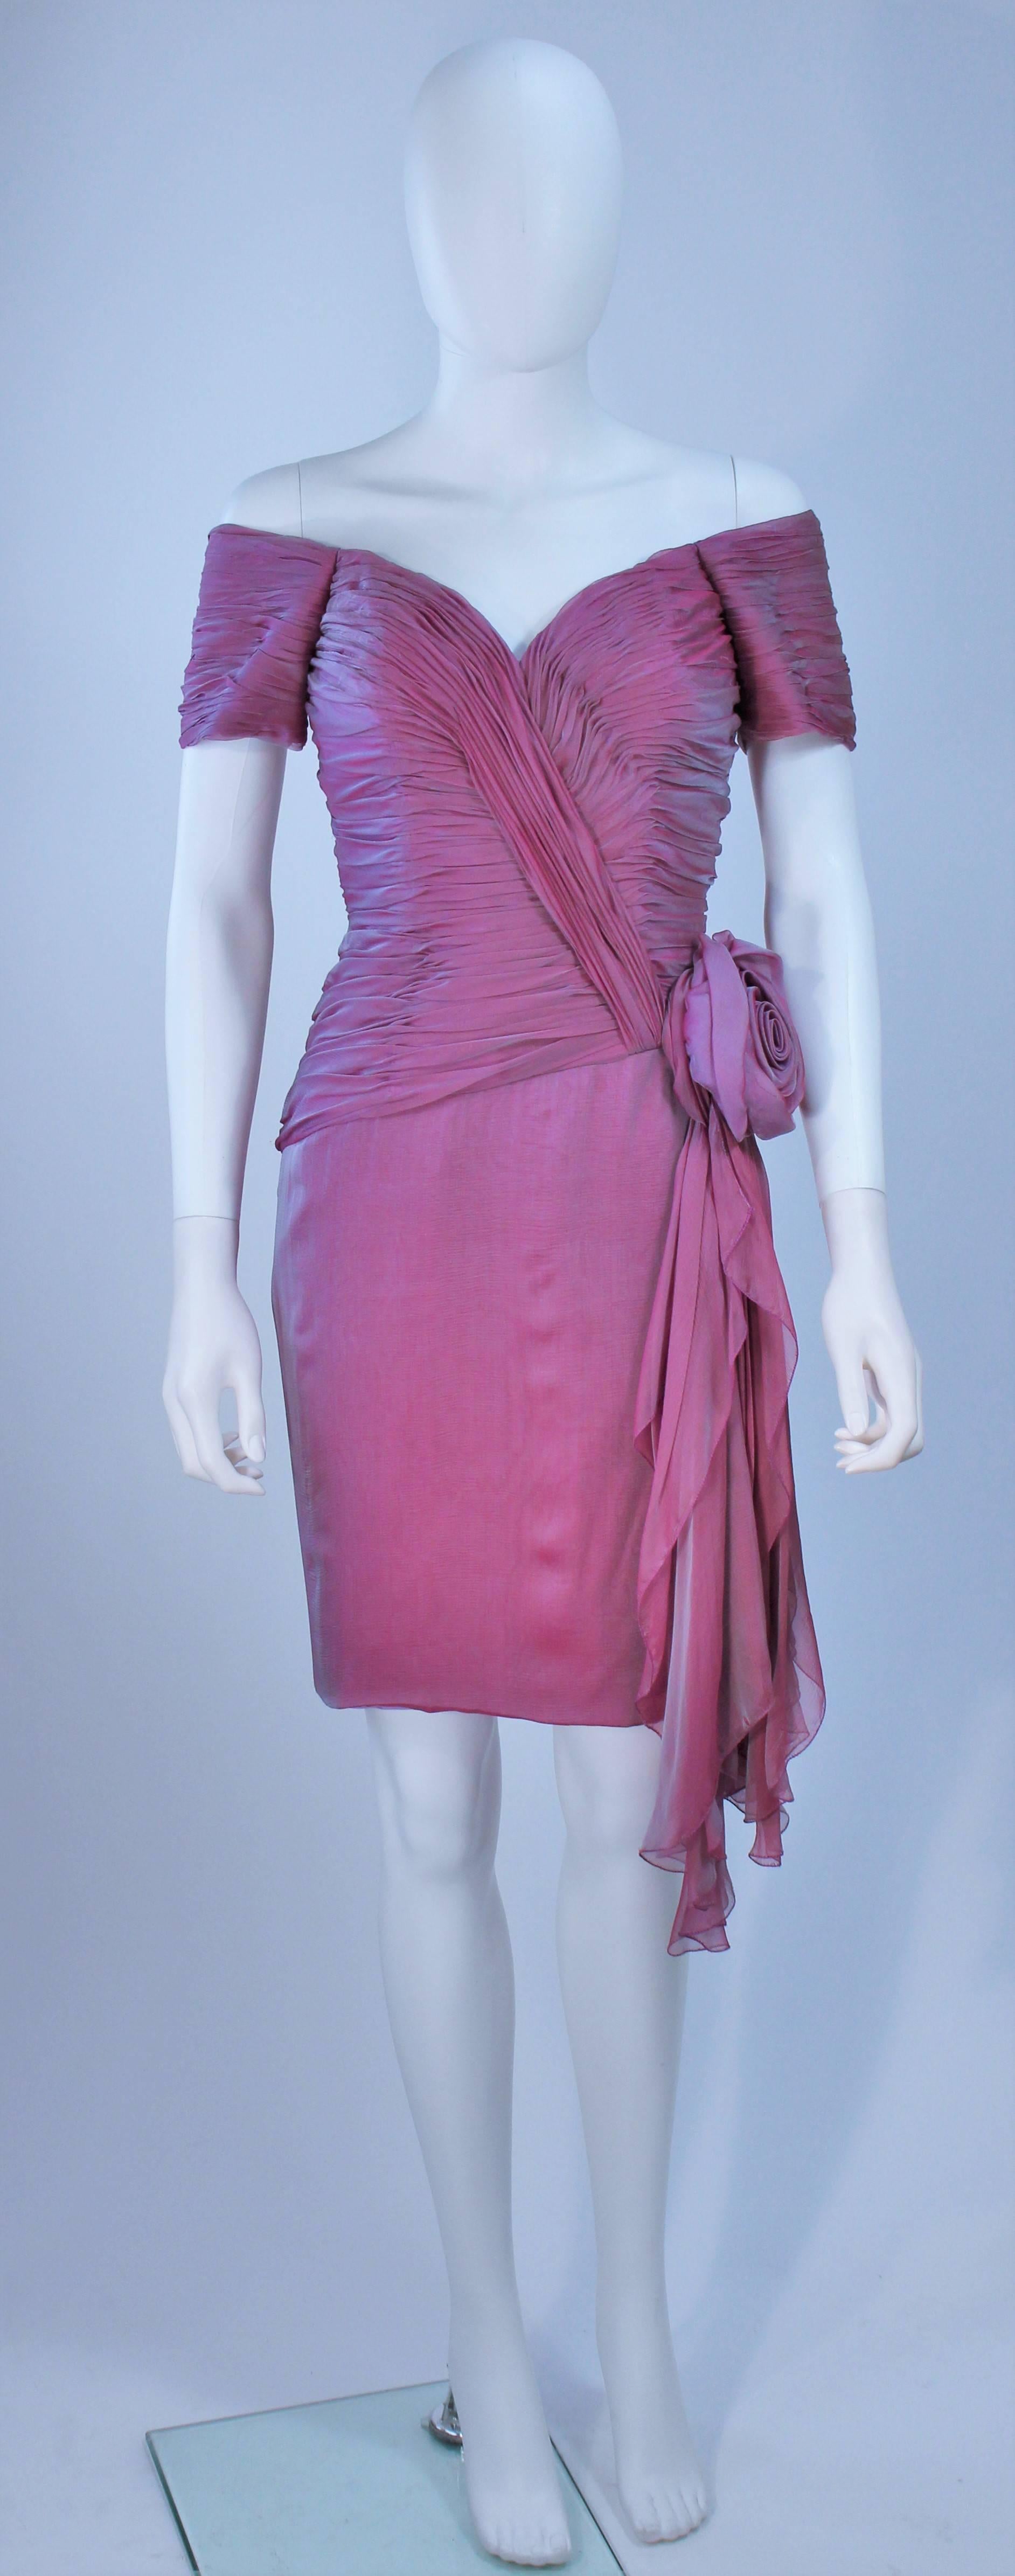  This Vicky Tiel  dress is composed of an iridescent lavender hue silk. Features a large rose and draping with a ruched bodice. There is a center back zipper closure. In excellent vintage condition. 

  **Please cross-reference measurements for